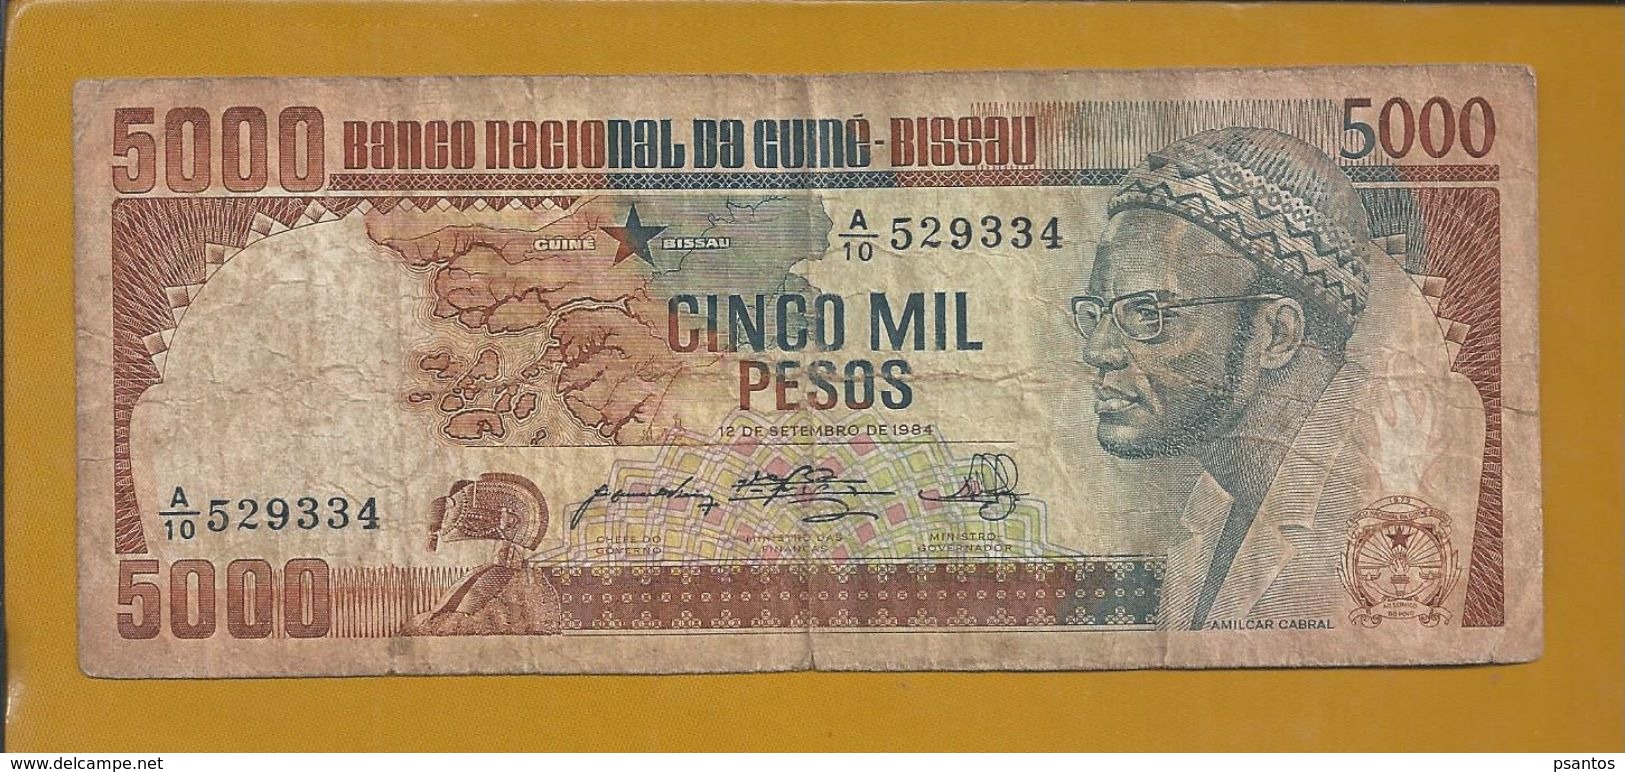 Note Of 5,000 Pesos From Guinea Bissau. Amilcar Cabral.Nota De 5.000 Pesos Da Guiné Bissau. Amilcar Cabral. - Guinea-Bissau